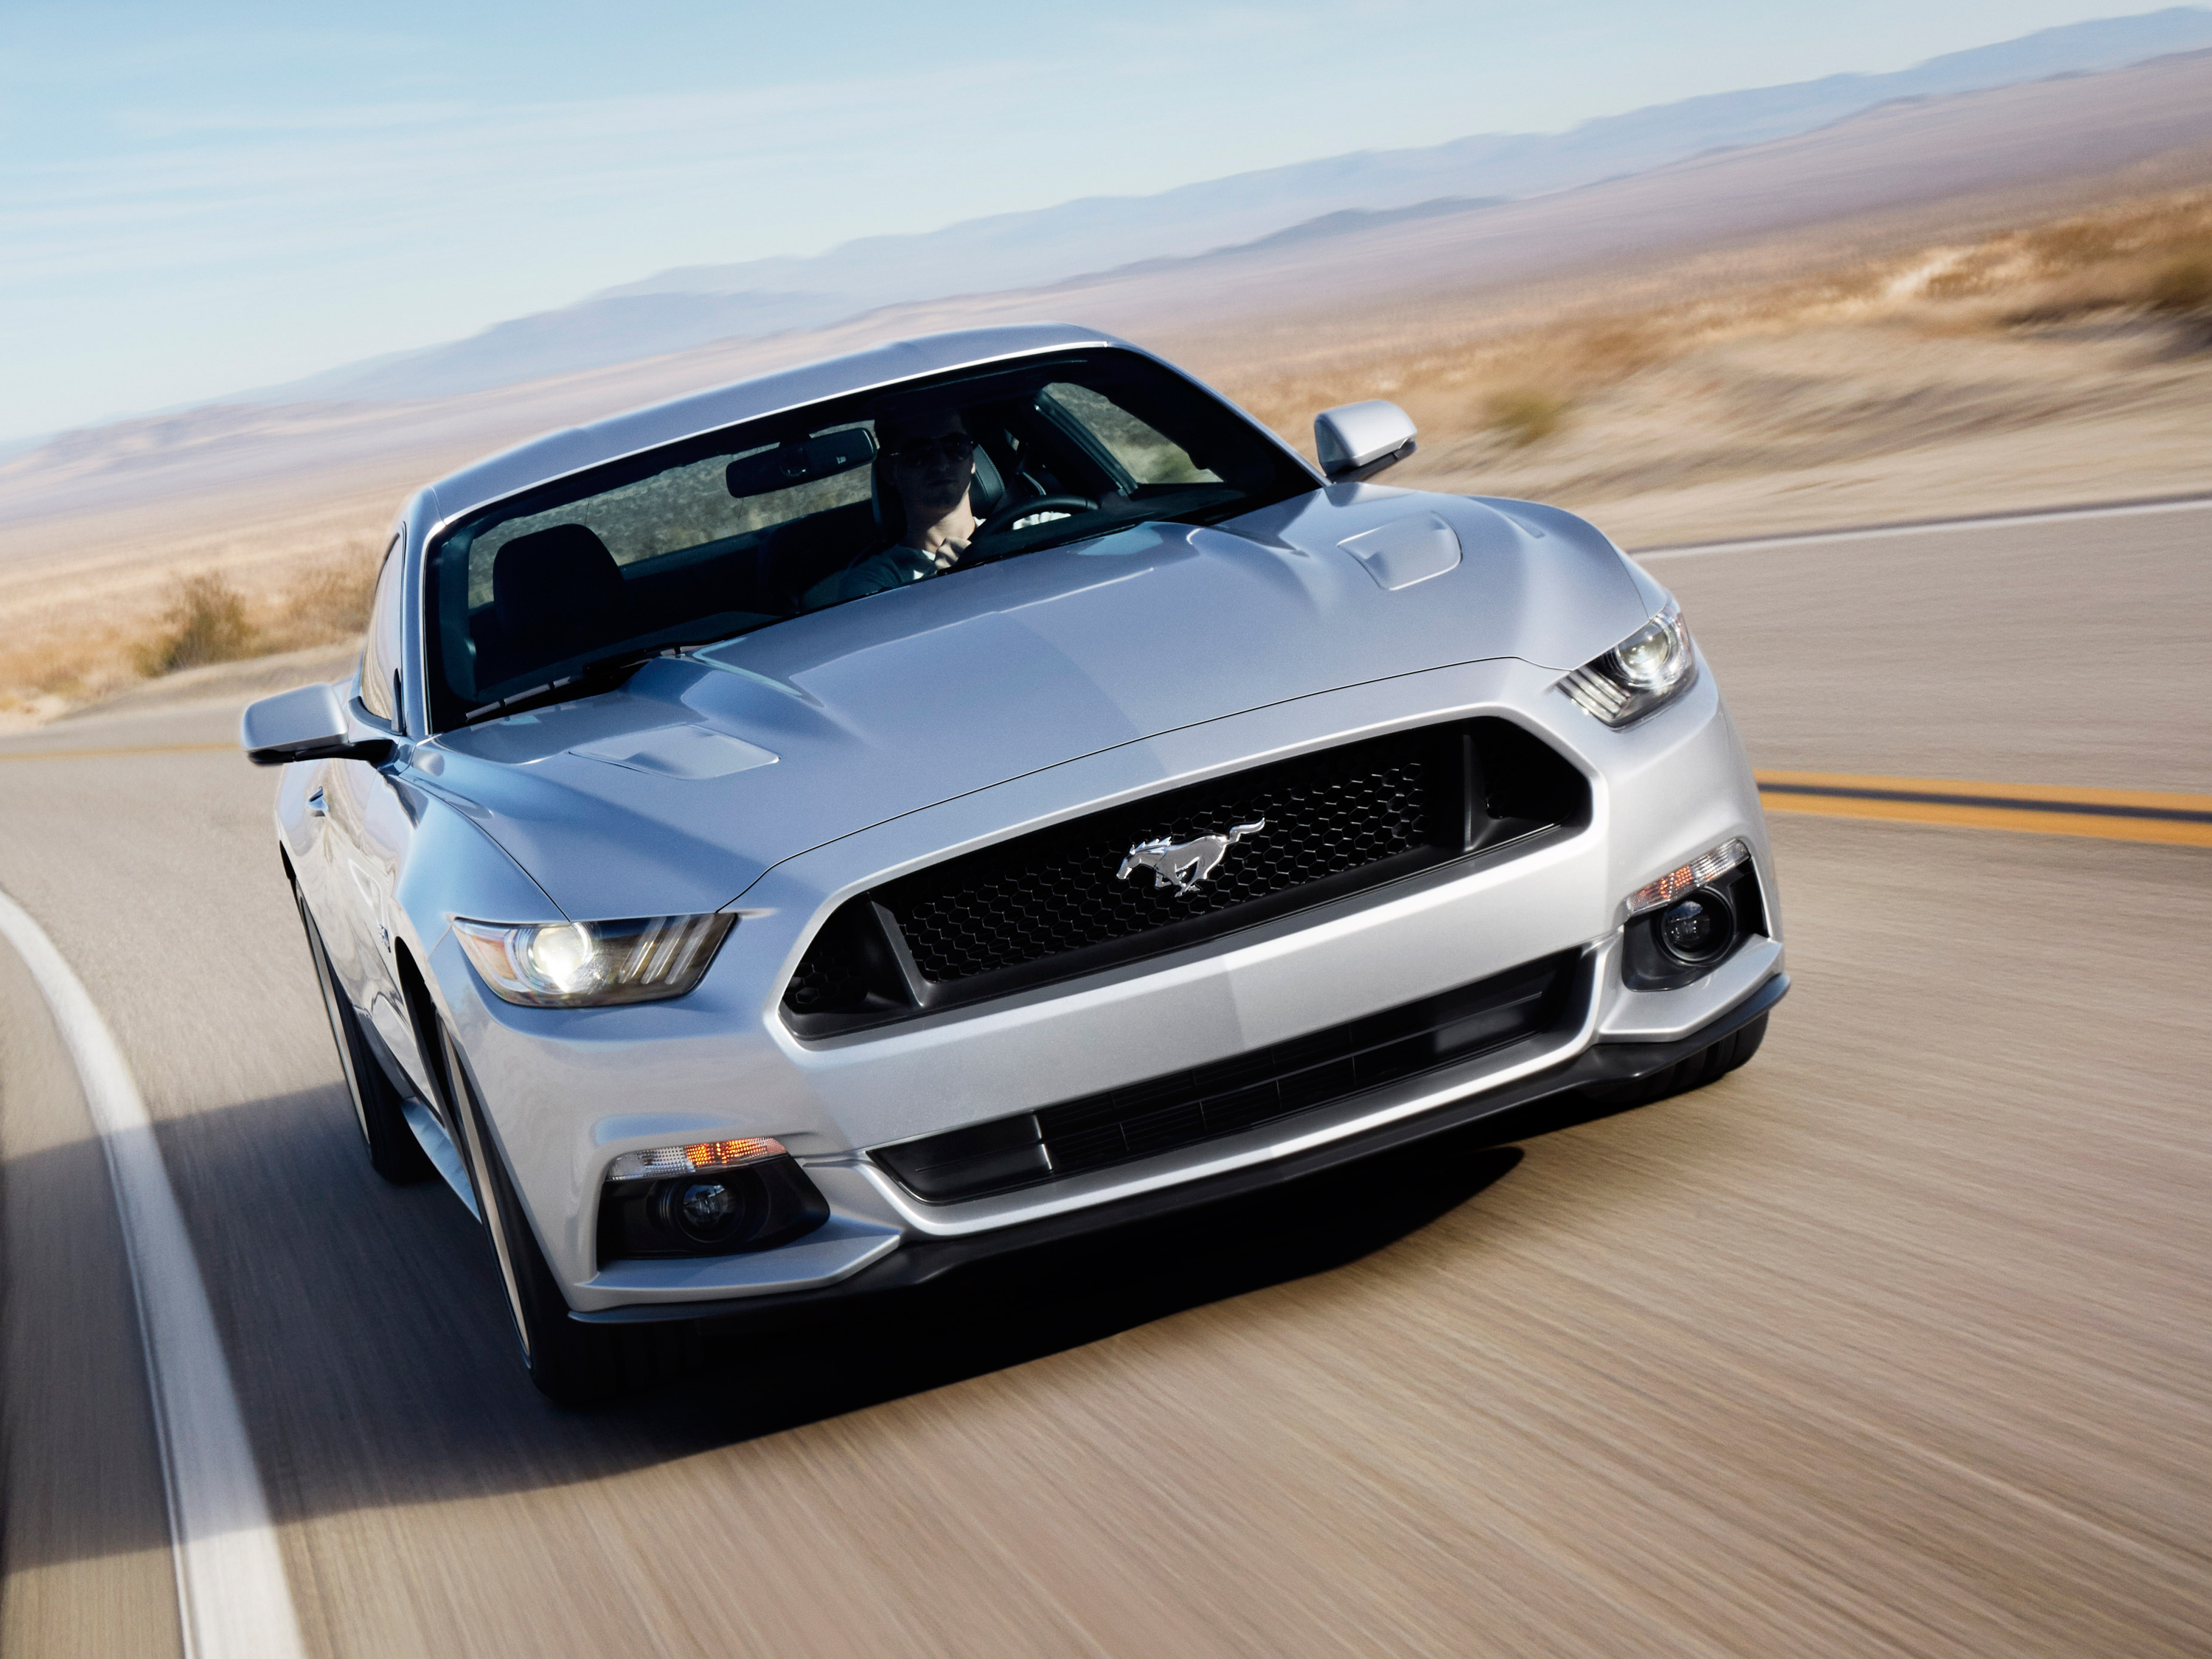 2015 MUSTANG SALES OFF TO HOT START! BEST NOVEMBER SINCE ’06!